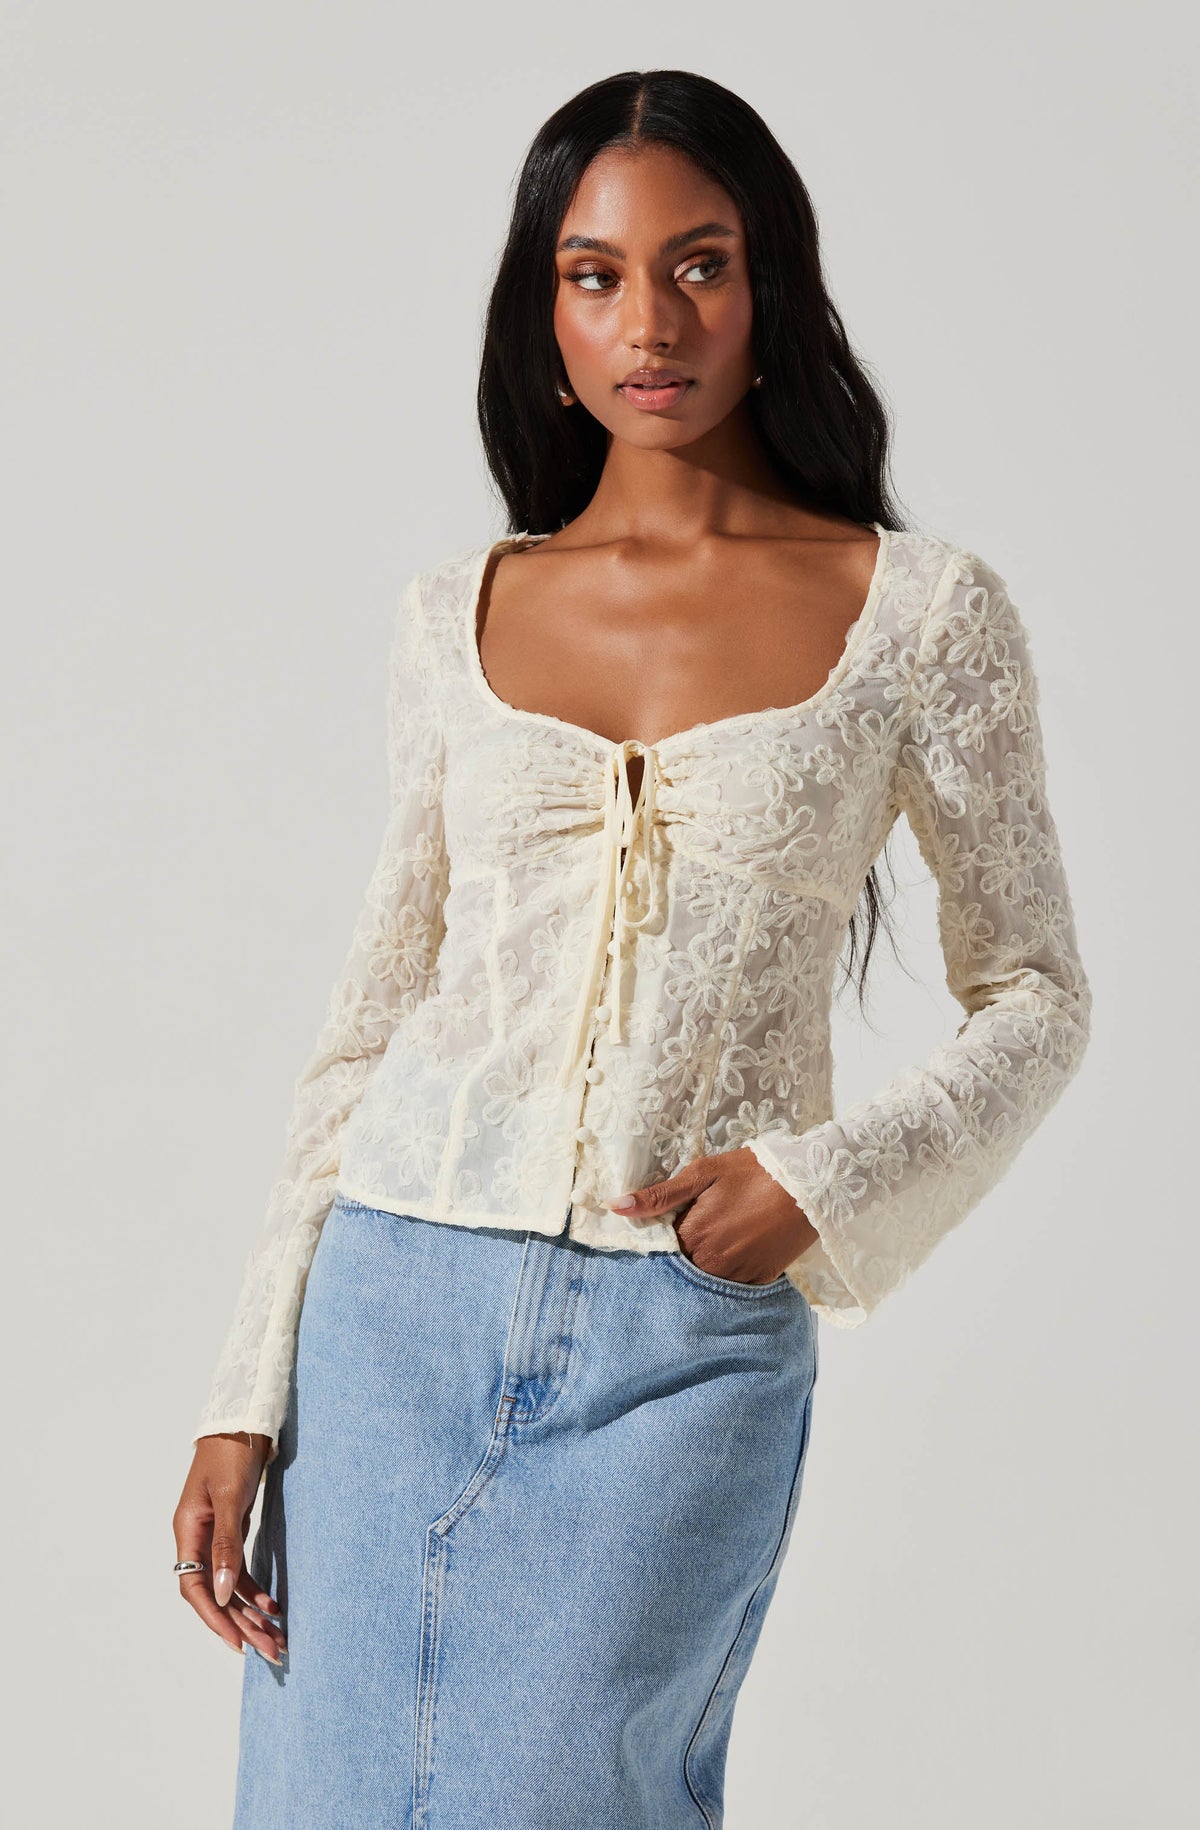 White Lace Sheer Tank Top – Free From Label